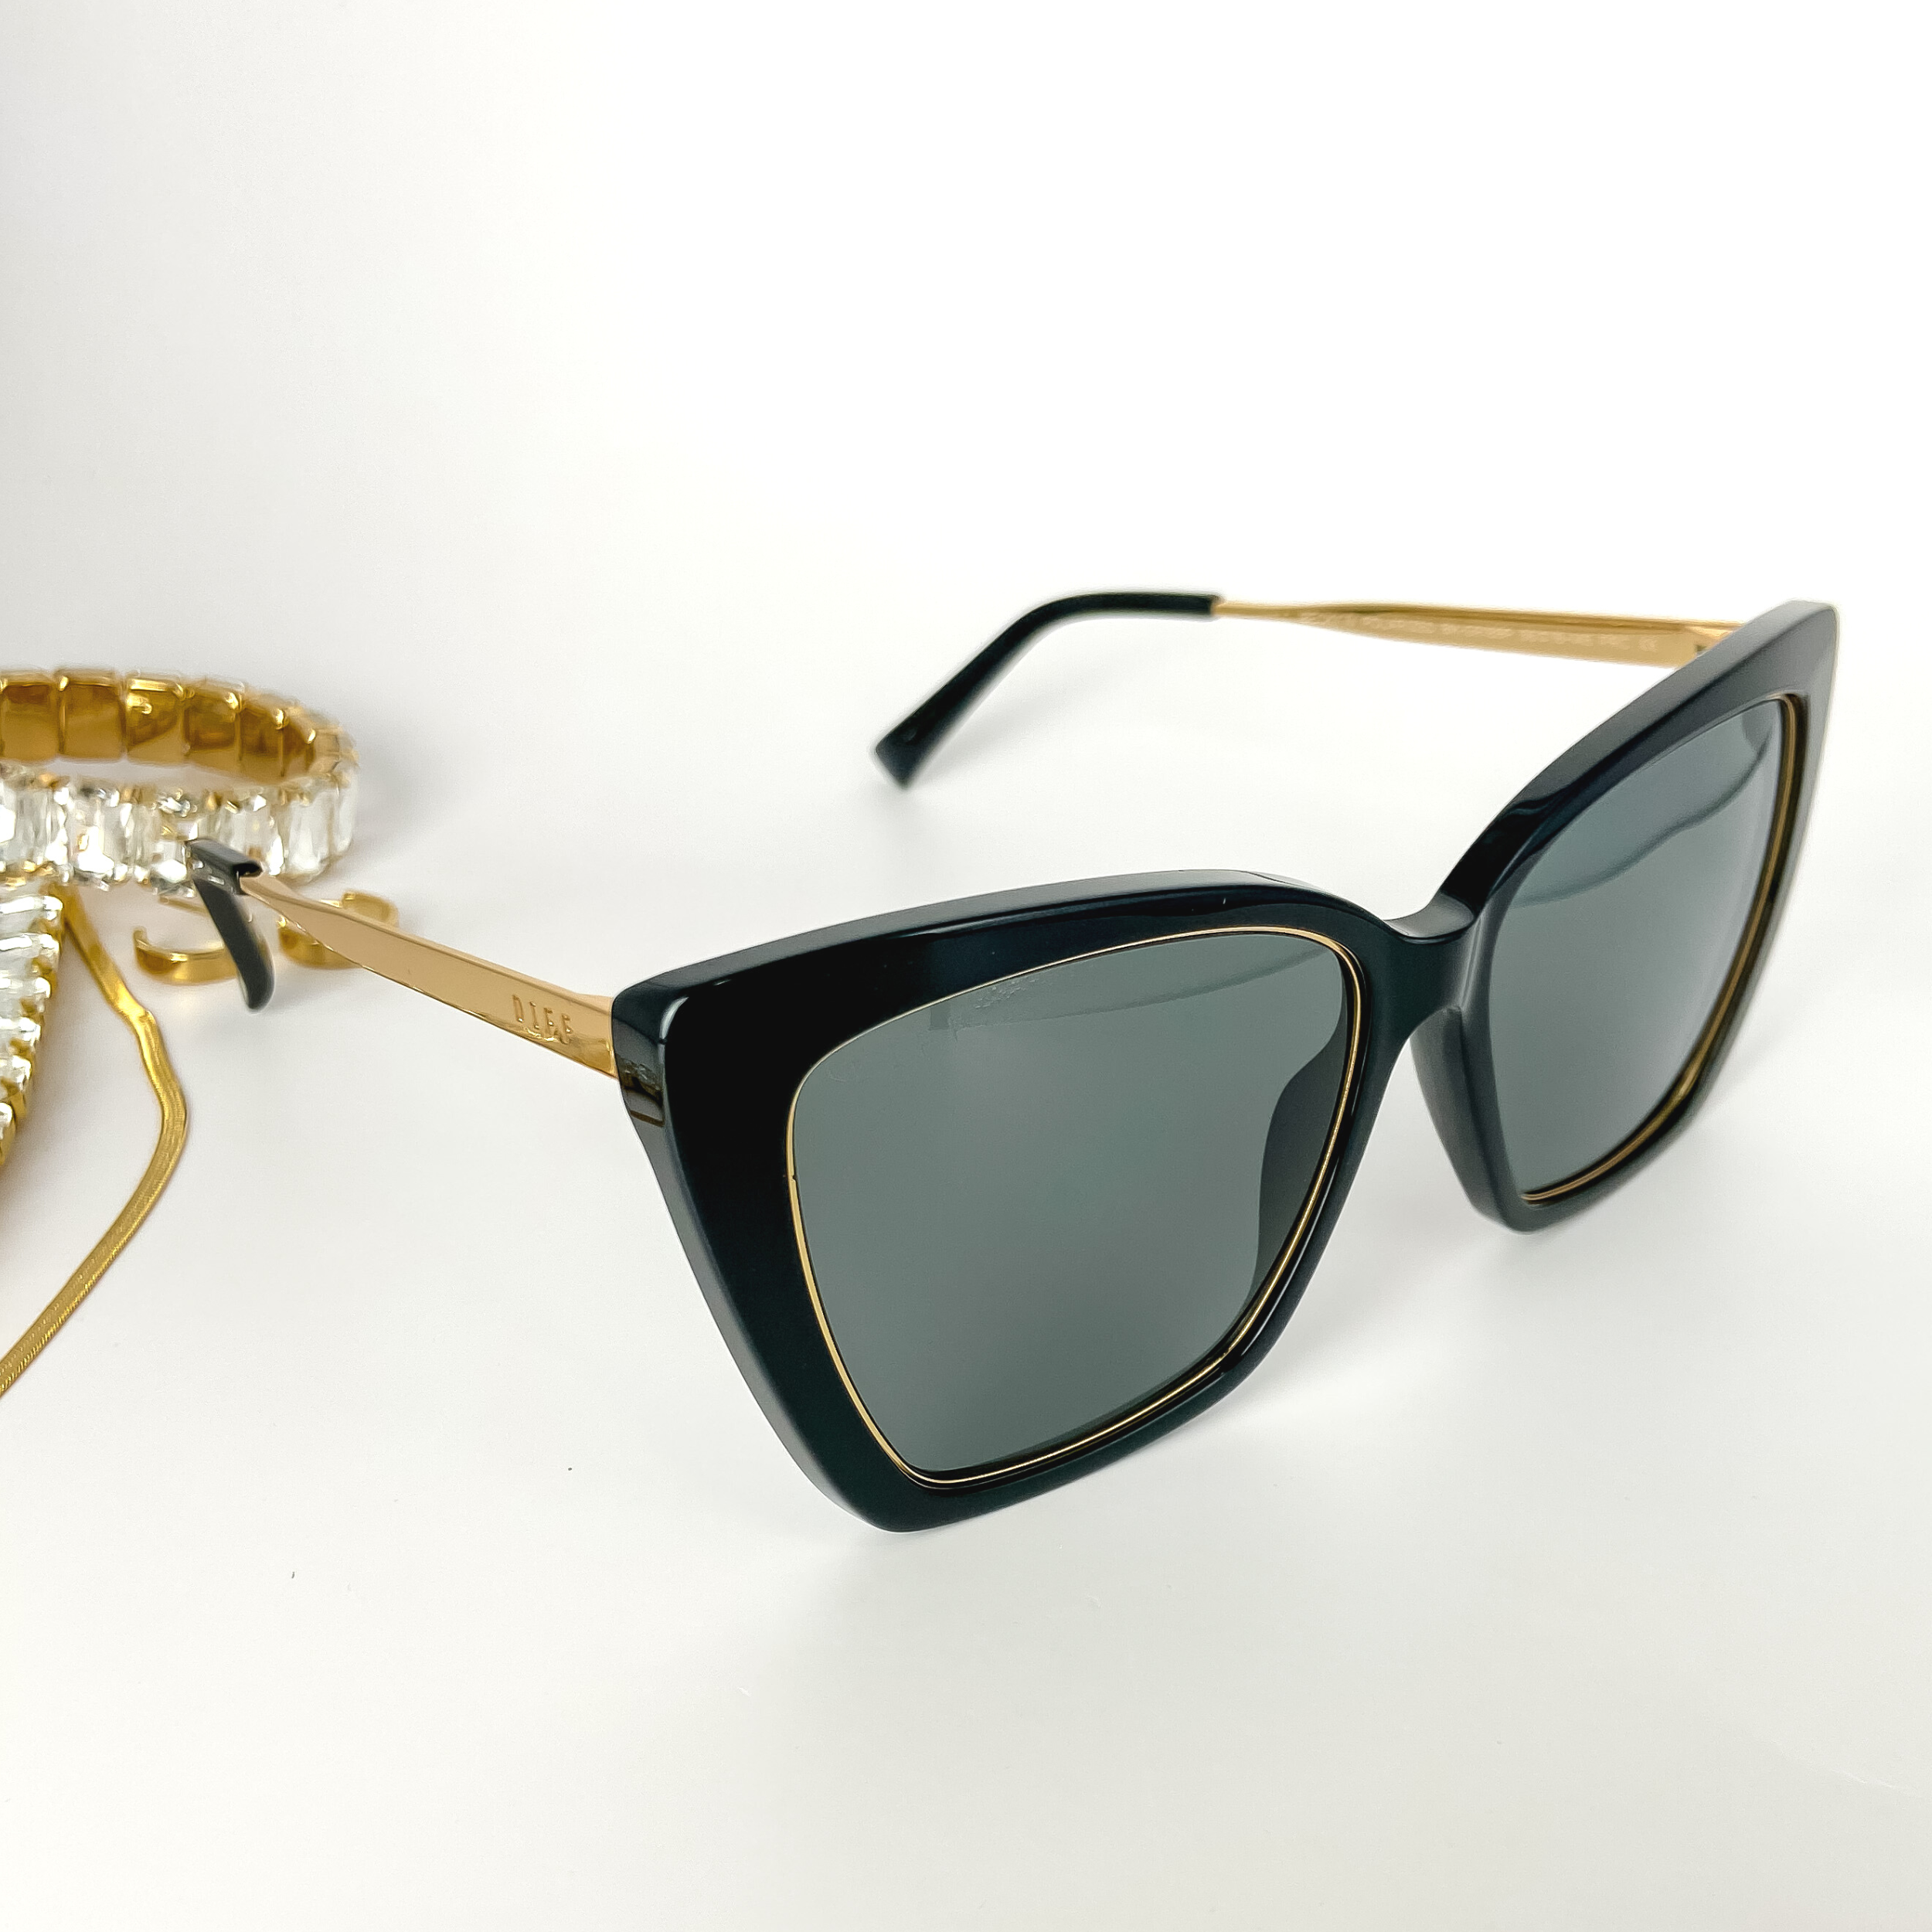 A pair of gold-tone and black cat-eye sunglasses pictured open on a white background with gold jewelry.